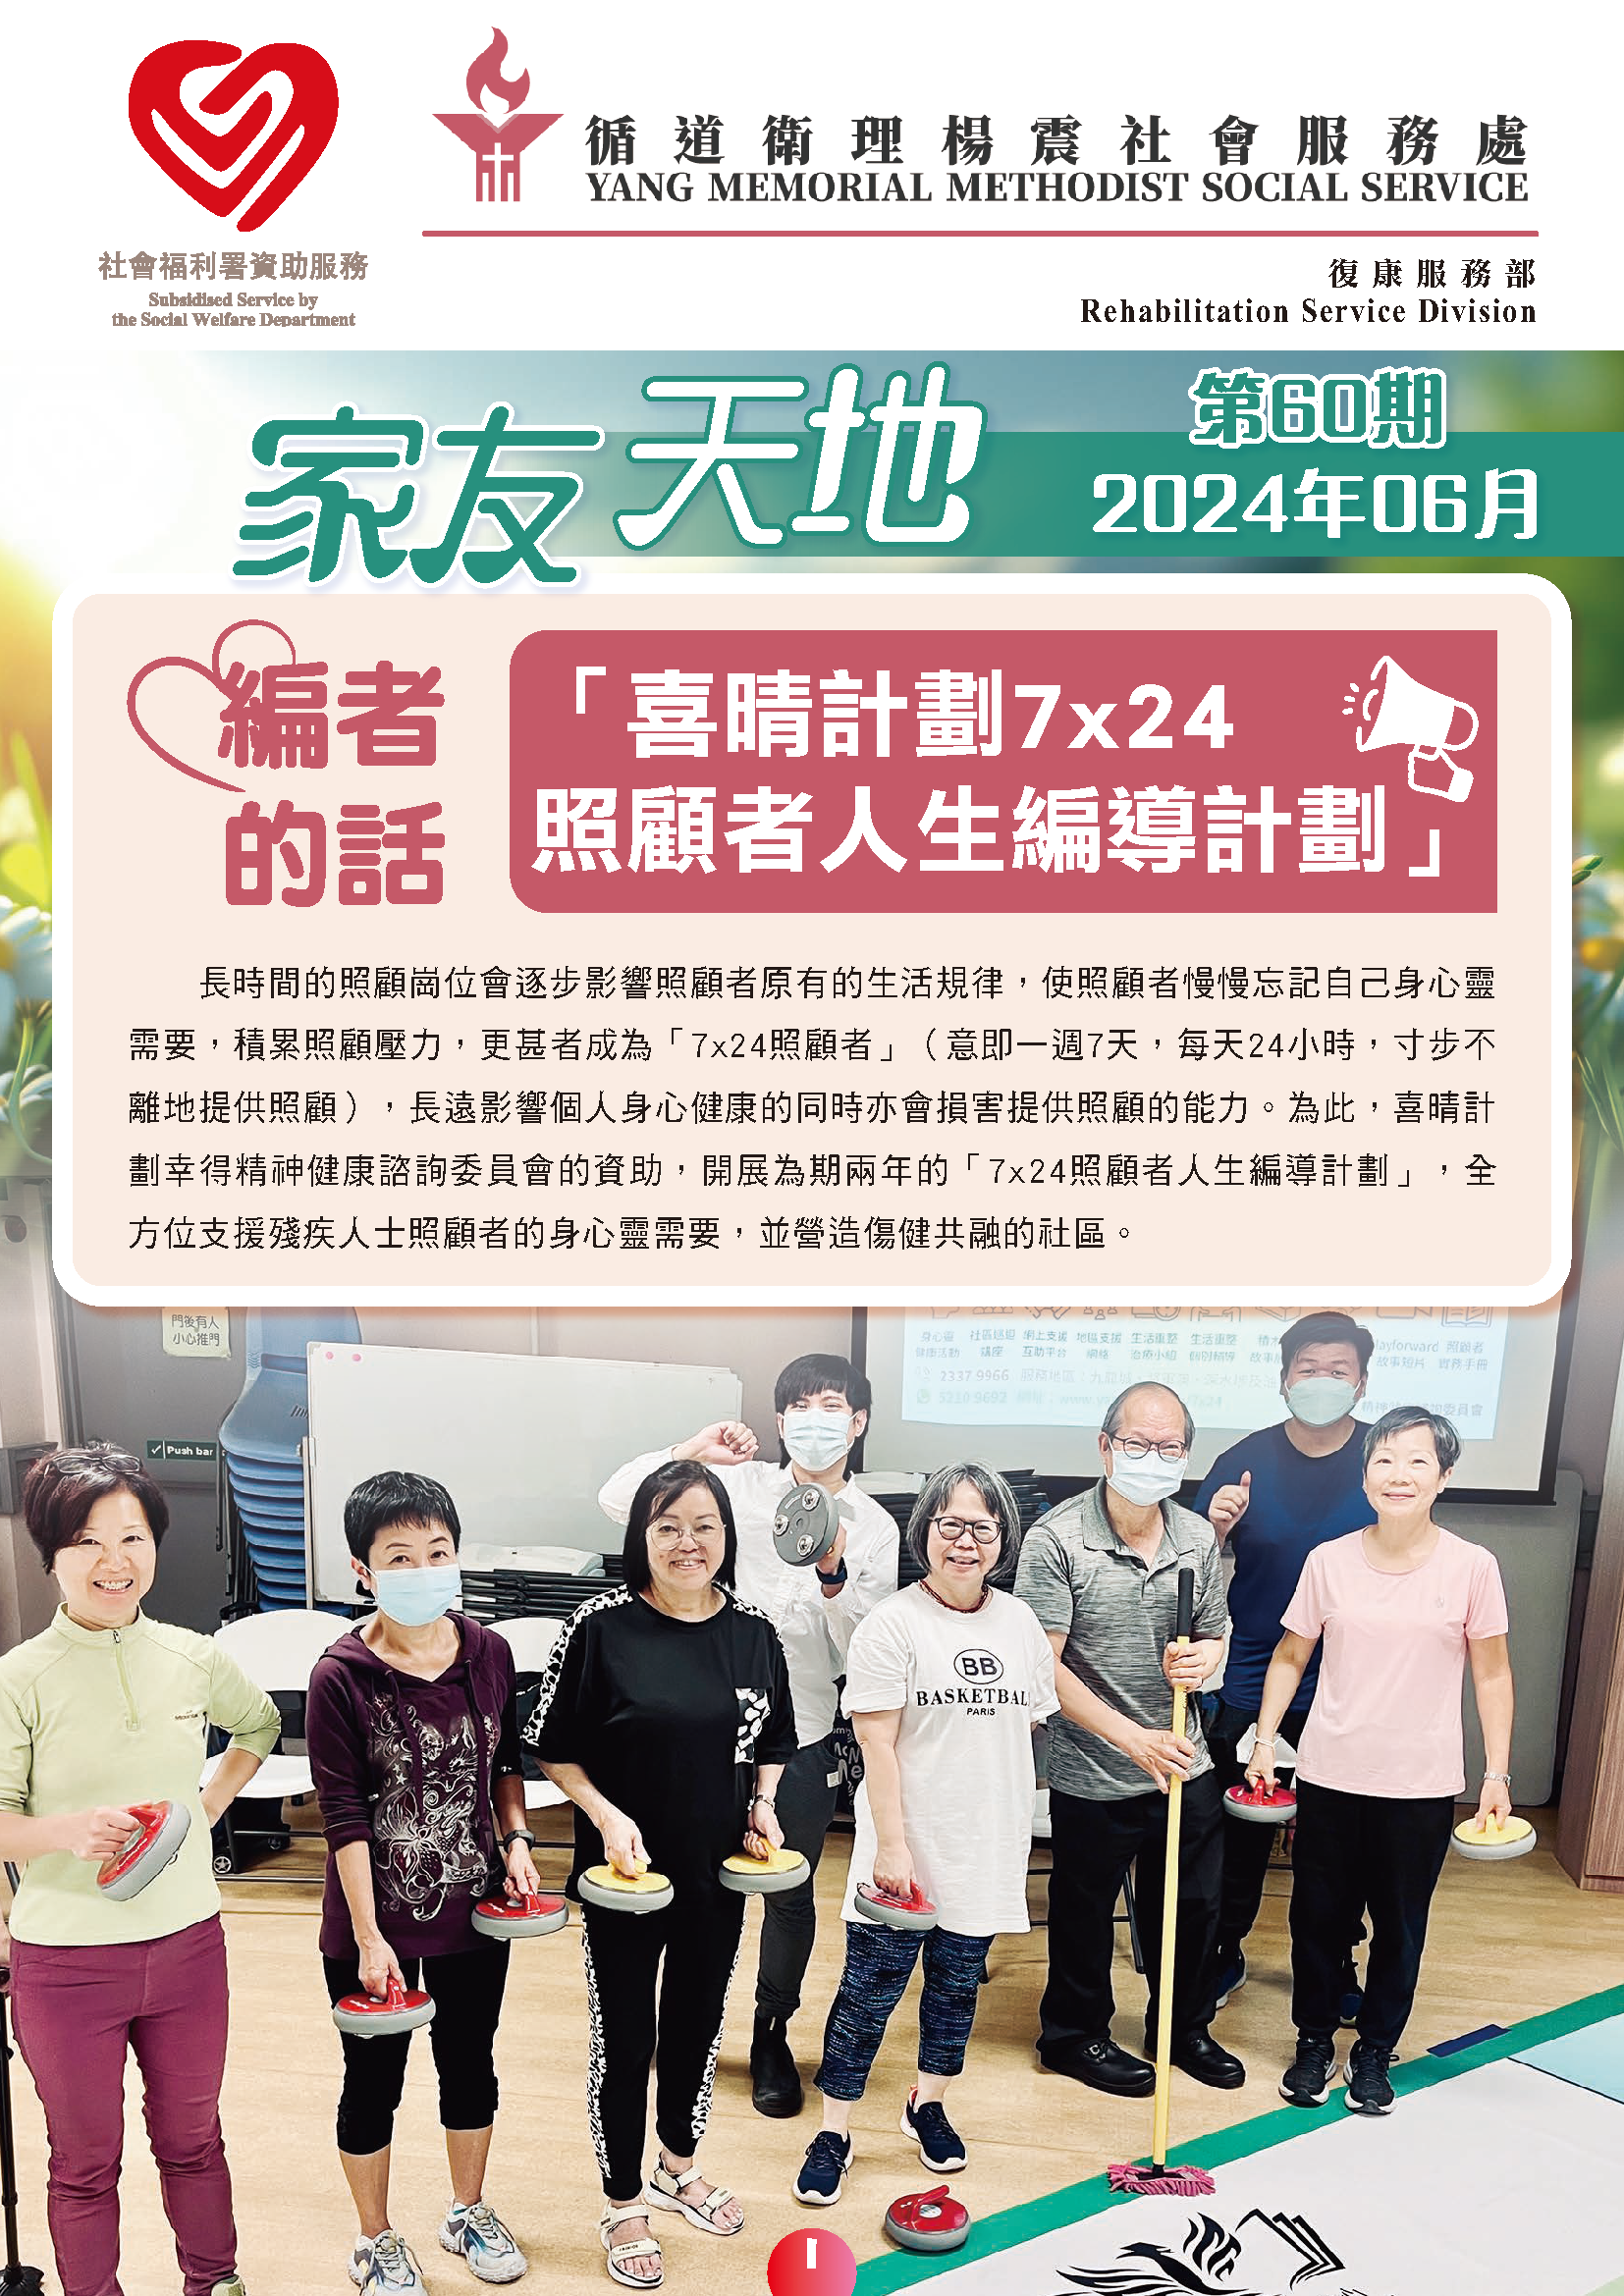 Publications of the Rehabilitation Services「家友天地」